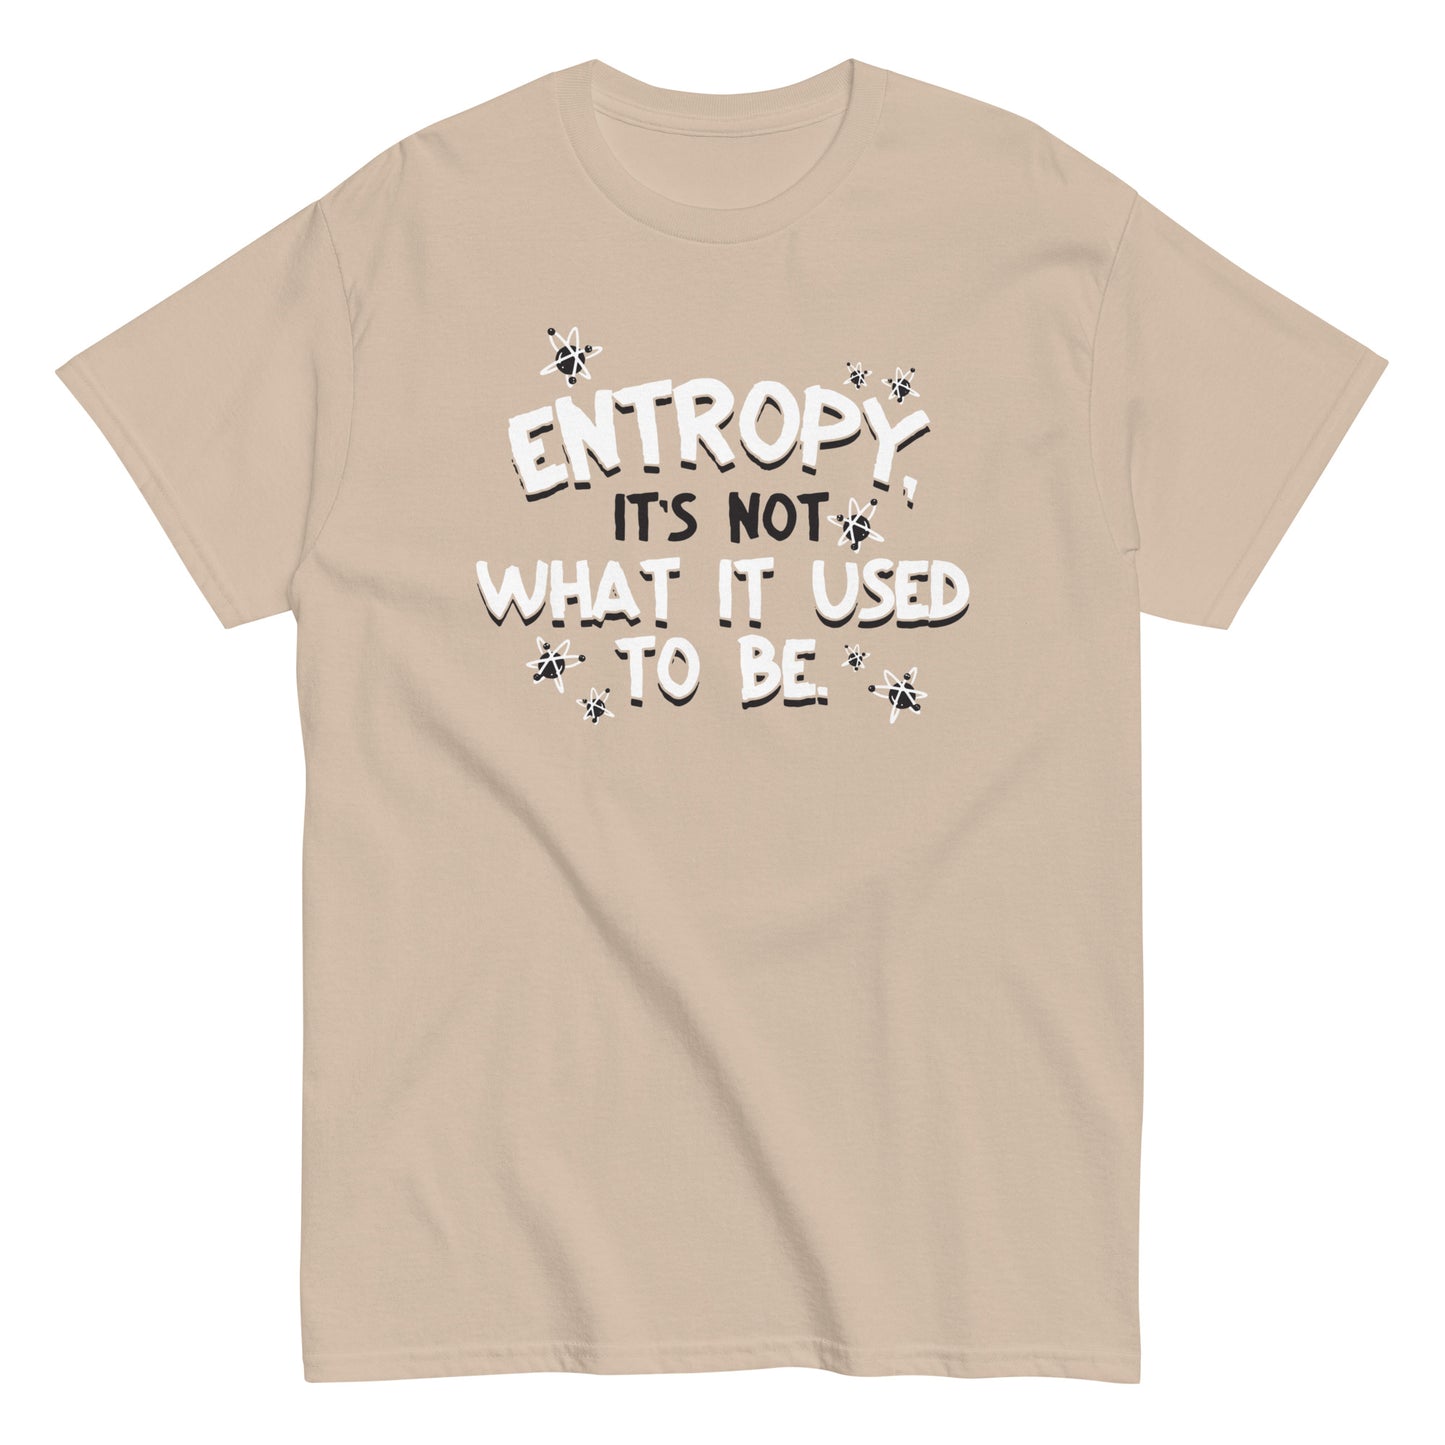 Entropy, It's Not What It Used To Be Men's Classic Tee